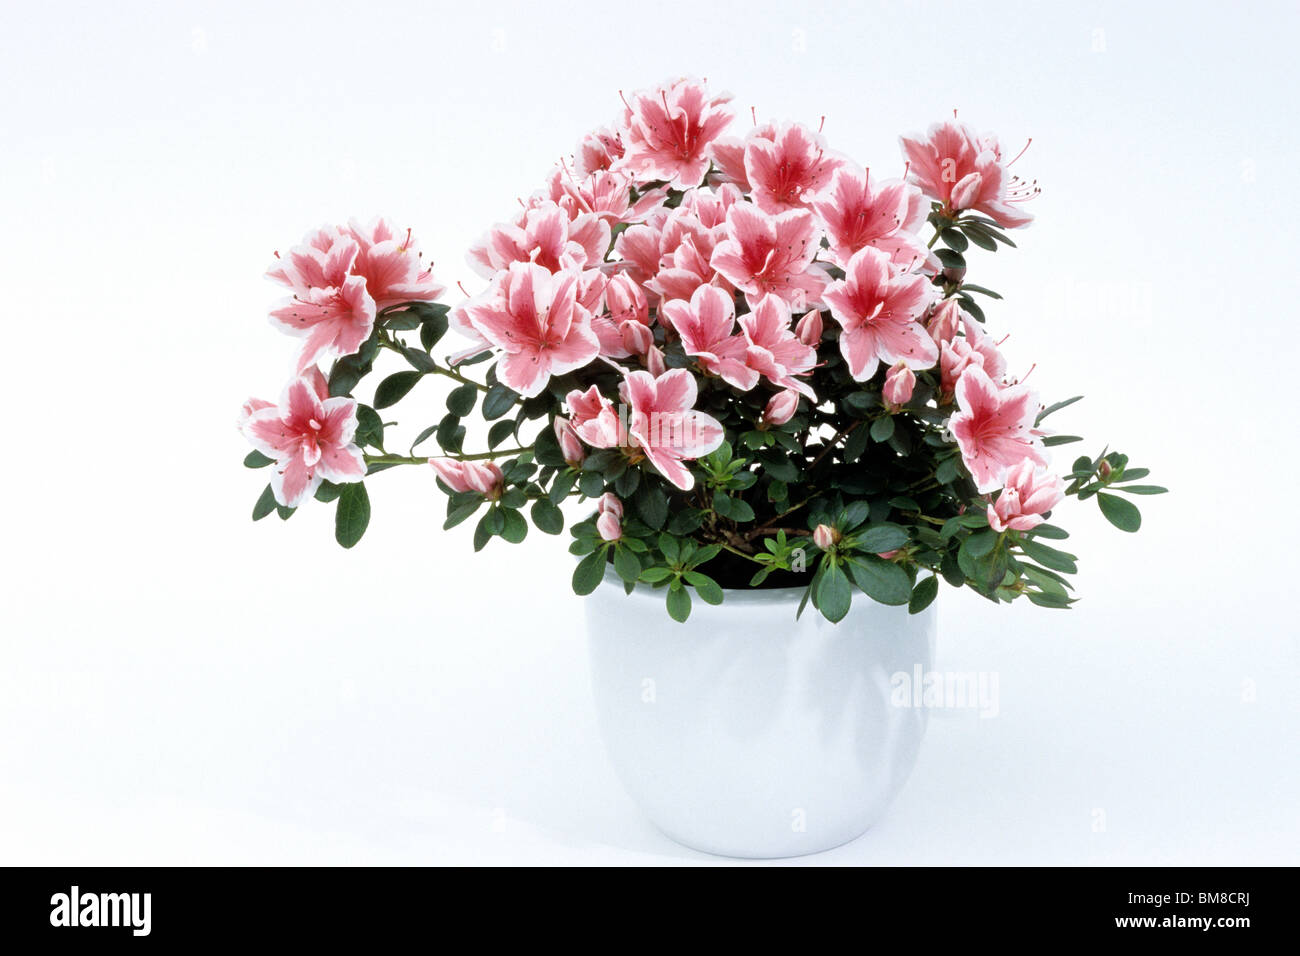 Rhododendron Azalea Plant High Resolution Stock Photography And Images Alamy